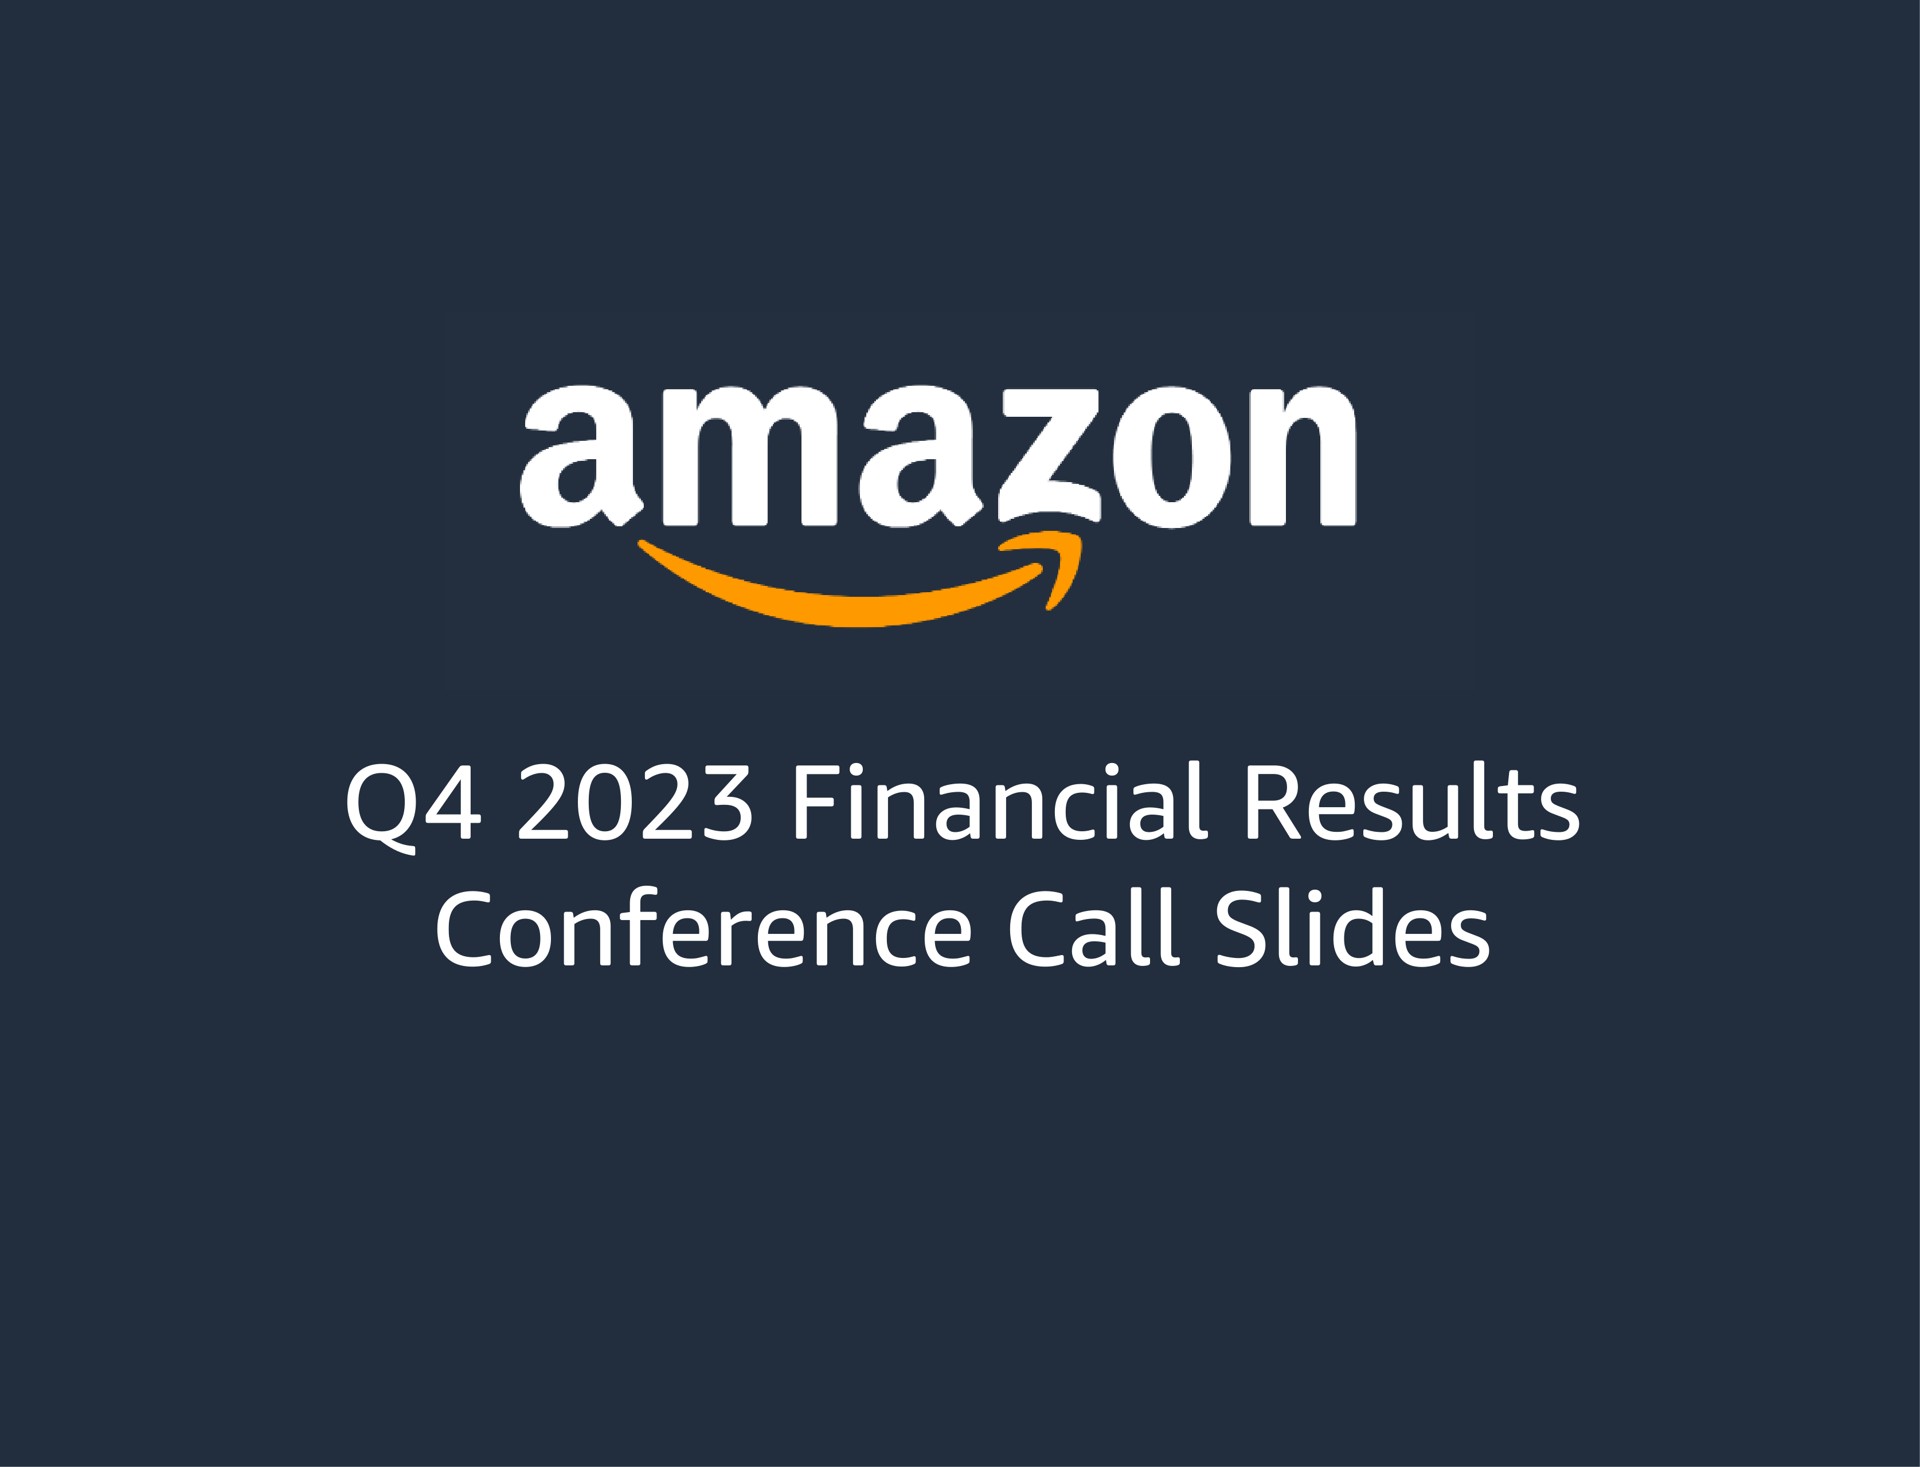 financial results conference call slides | Amazon